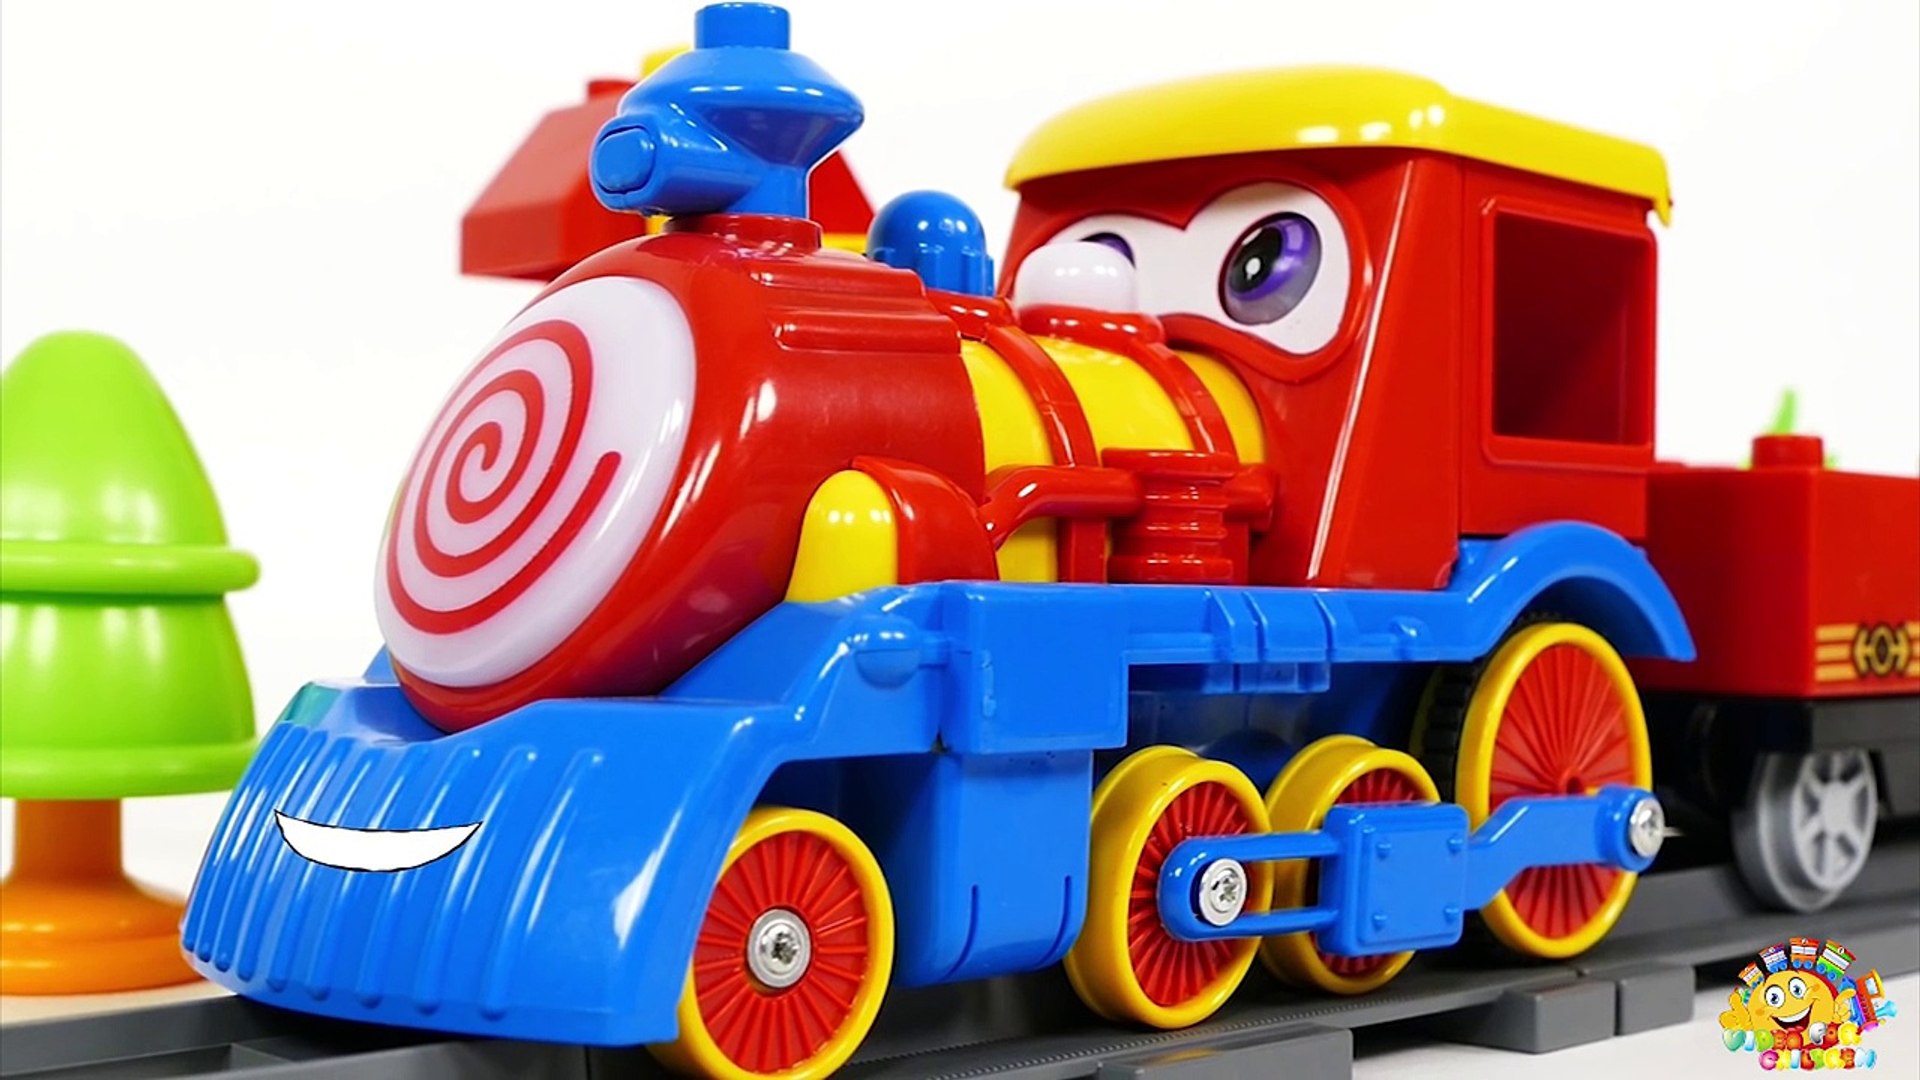 LEGO Duplo Train Crash with Truck + Surprise Eggs Cars Toys - 動画 Dailymotion